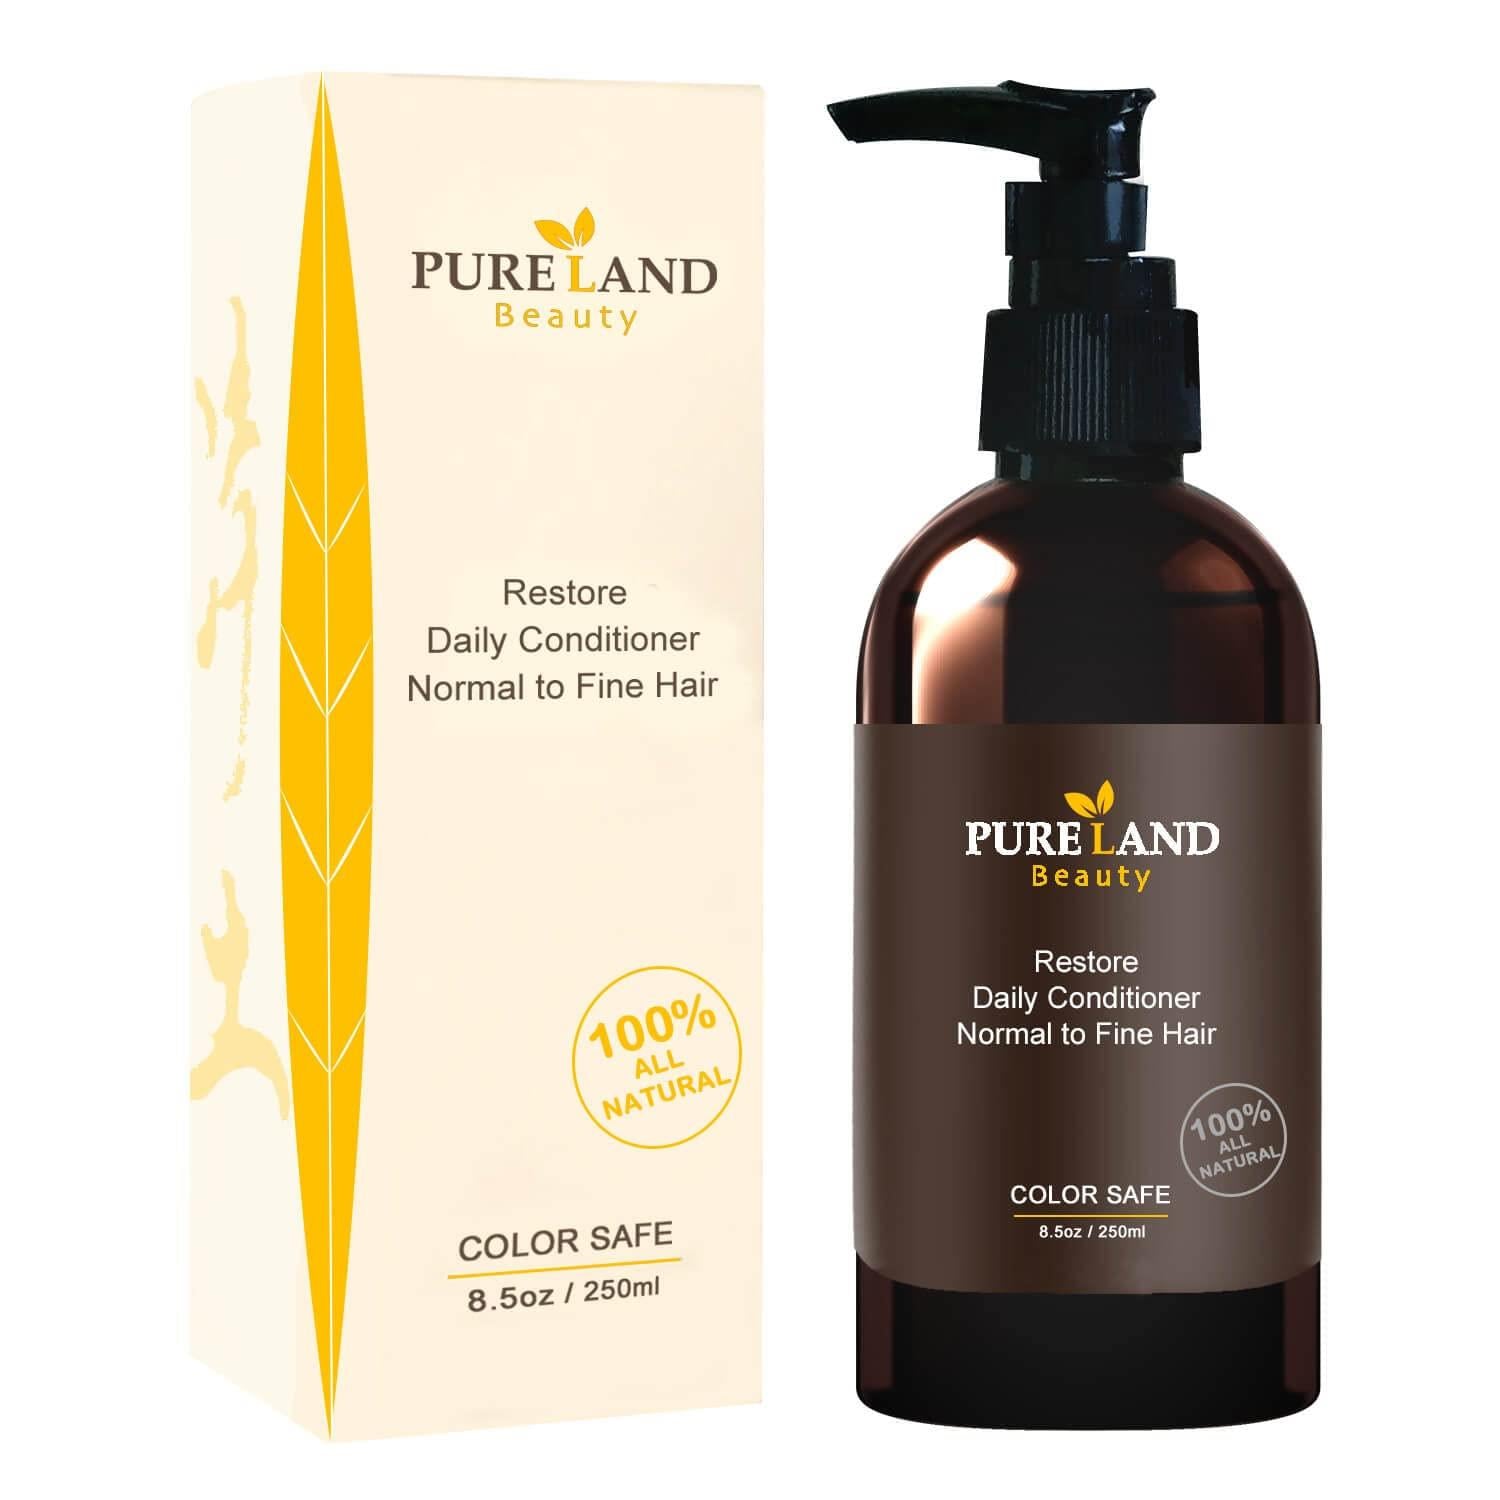 PURELAND Beauty Restore Daily 100% All Natural Conditioner, Sulfate-free 8.5 oz.